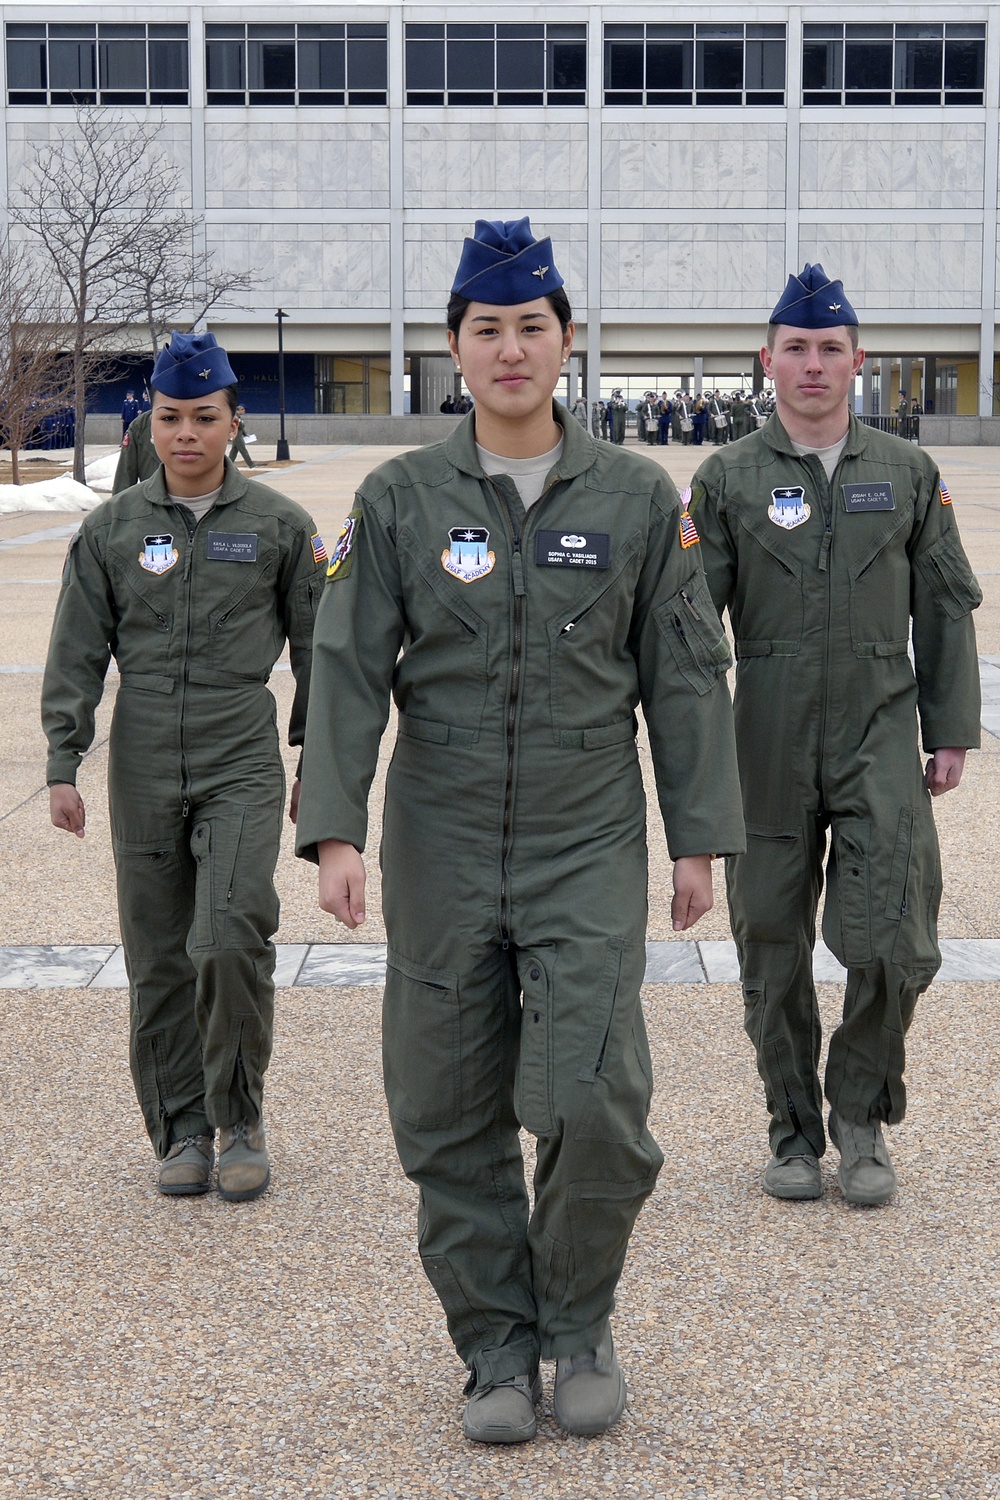 Air Force Academy squadron inspection